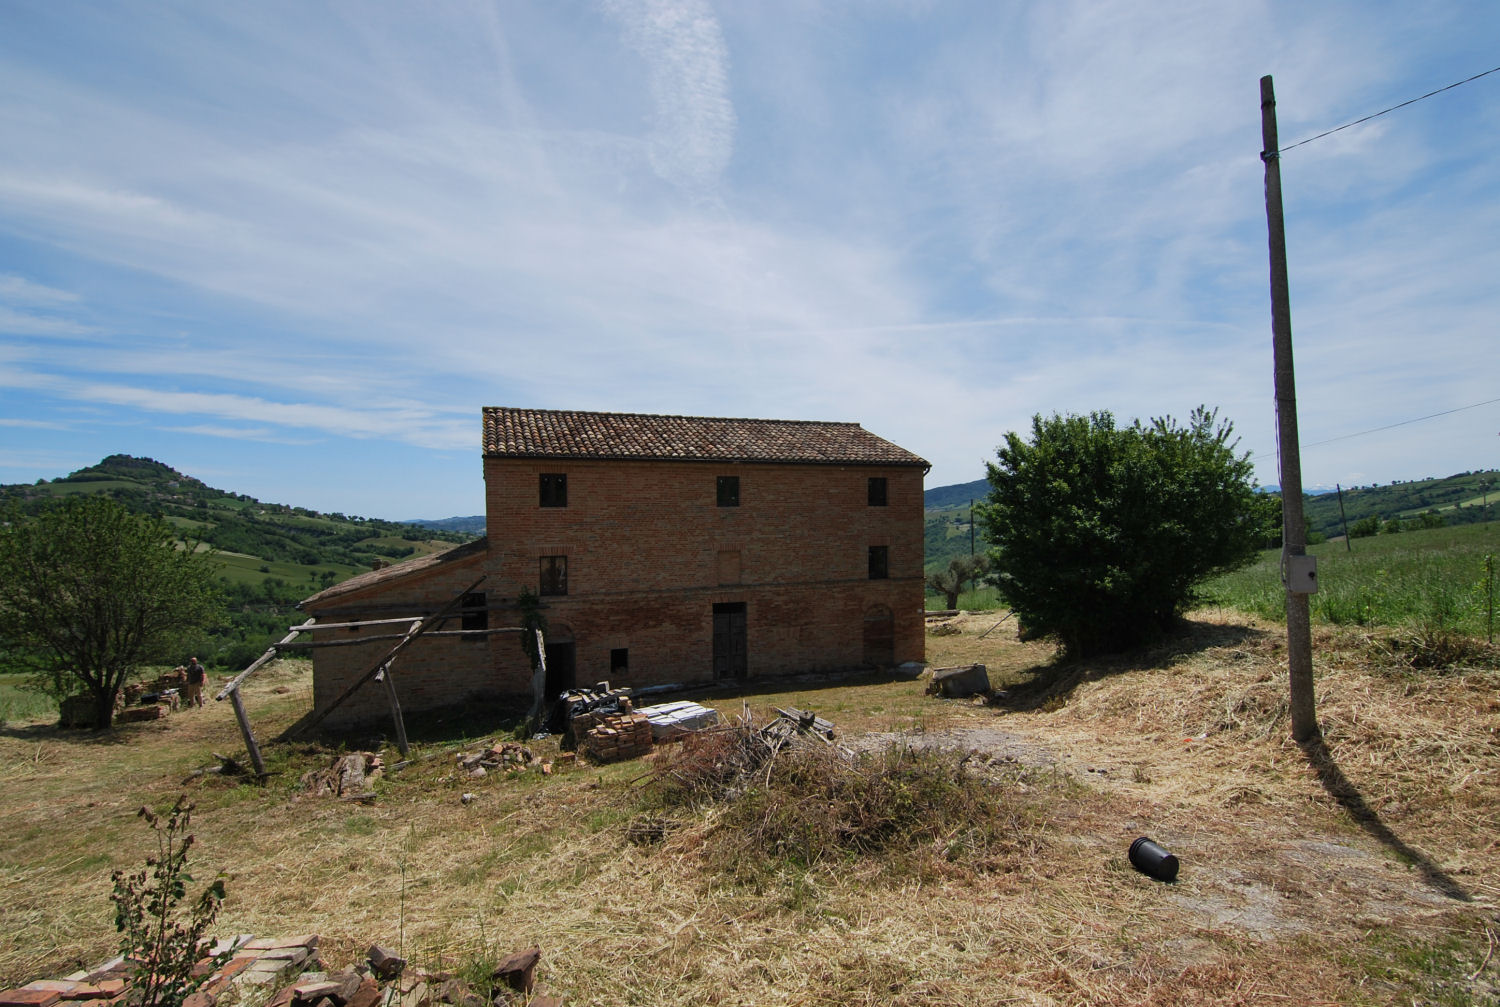 Stone country house in Penna San Giovanni